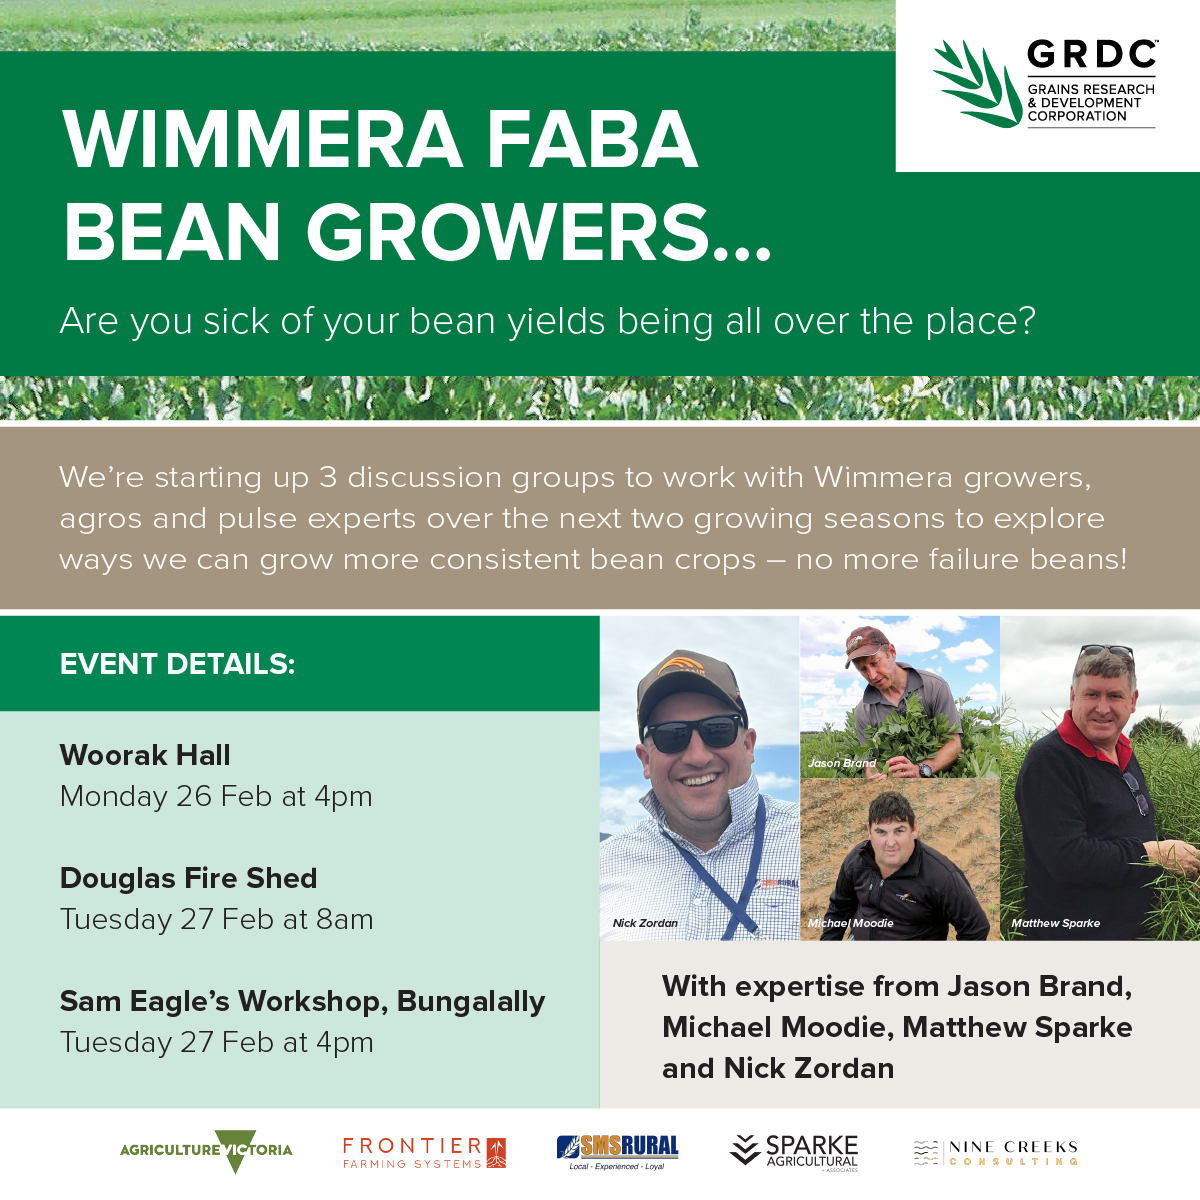 Are you looking to improve the performance of your faba beans? Join leading Wimmera agronomists for 3 new discussion groups in Woorak, Douglas and Bungalally starting late Feb @zordsinhorsh @matthew_sparke @JasonBrand @Moodie_ag 👉 Register bit.ly/48oWB46